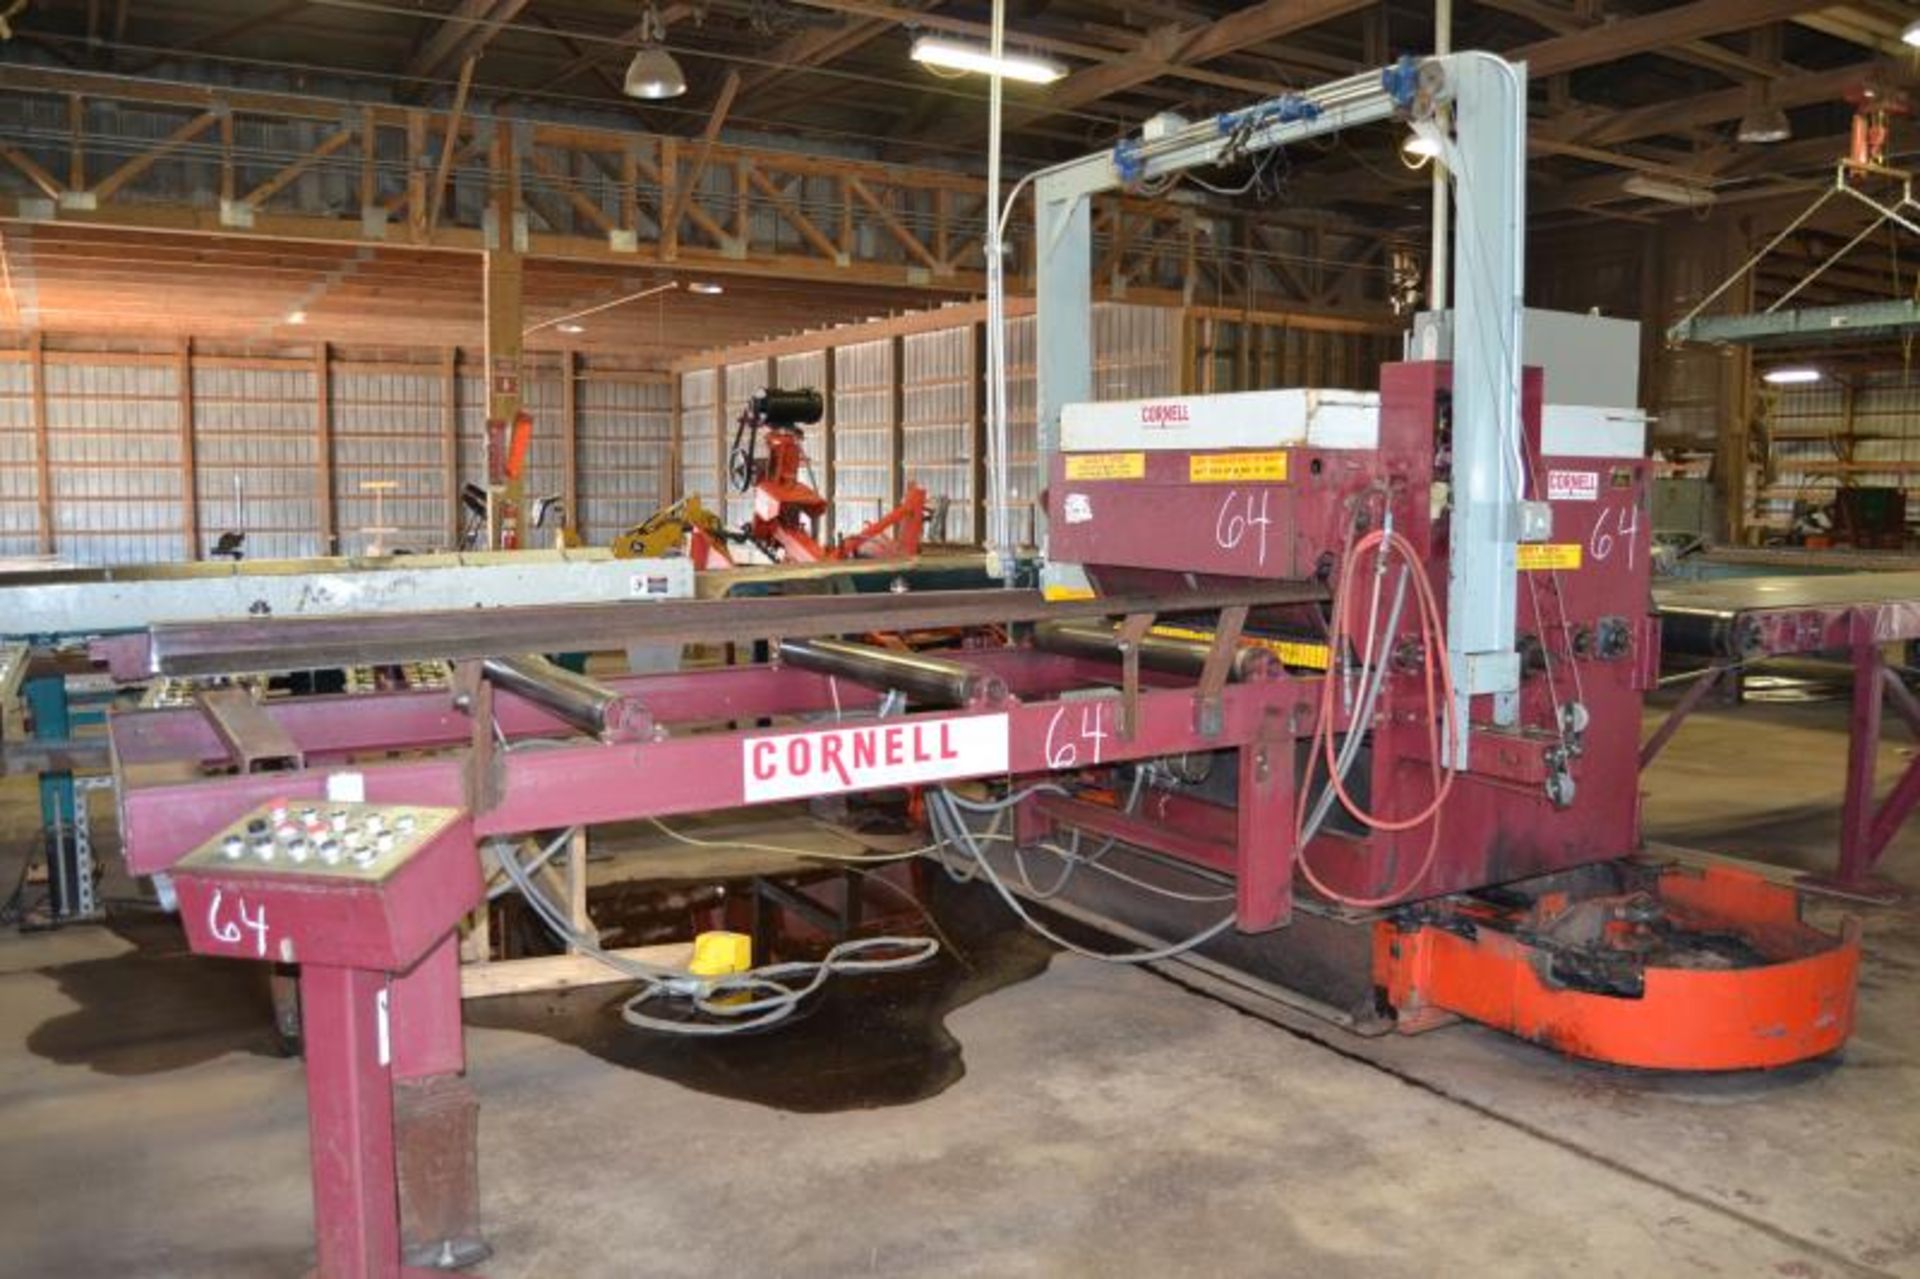 CORNELL 642 4 SAW EDGER W/ 2 MOVEABLE SAWS W/ ELECTRIC SETWORKS W/ INFEED ROLLCASE W/ FENCE W/